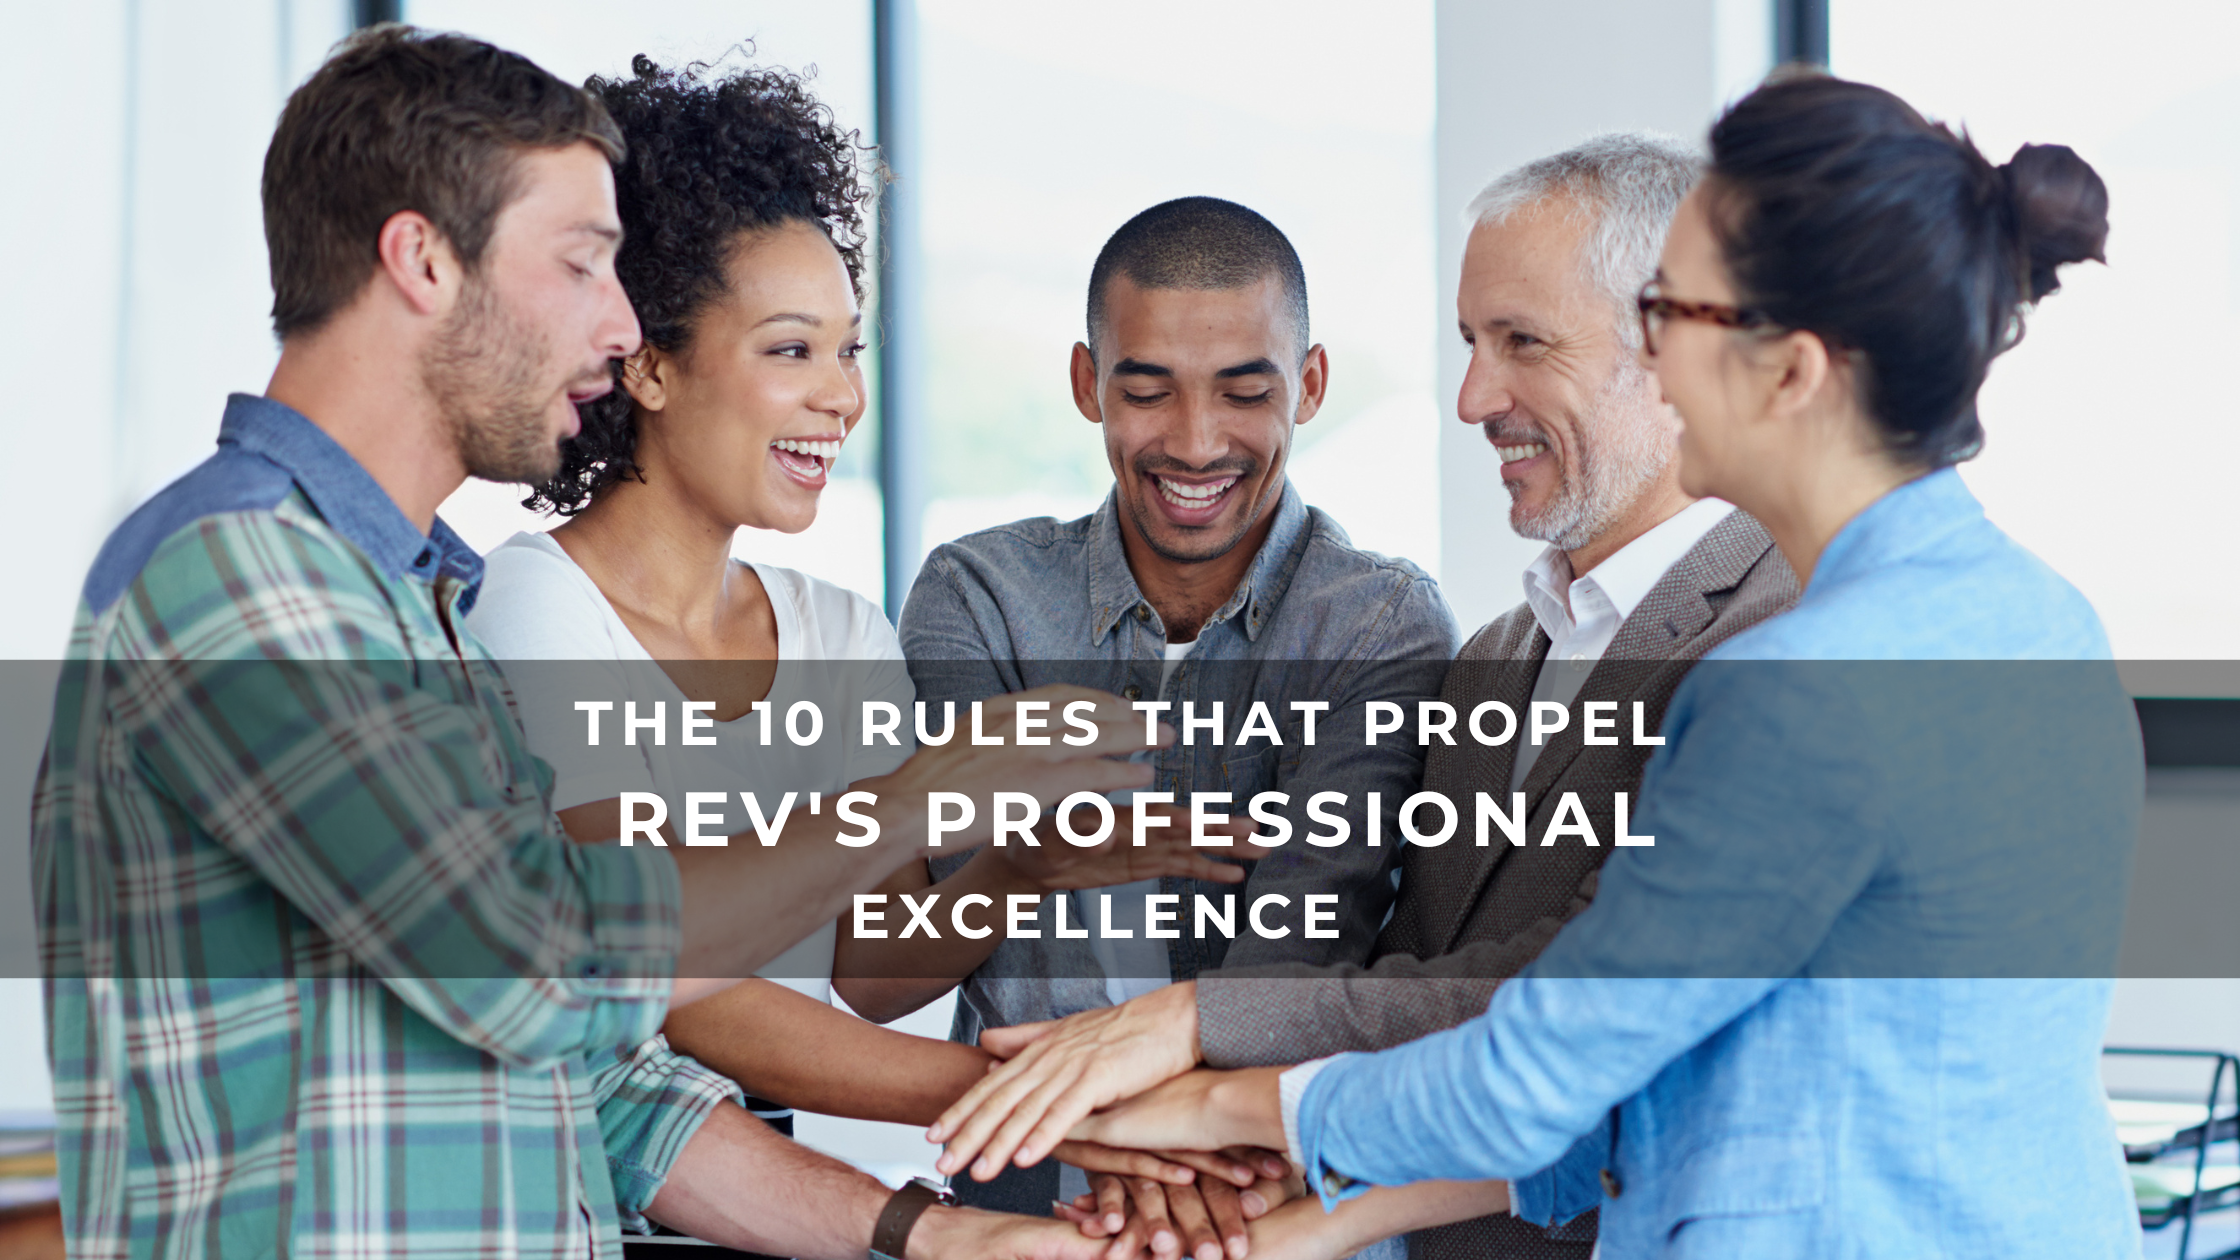 REV's Professional Excellence